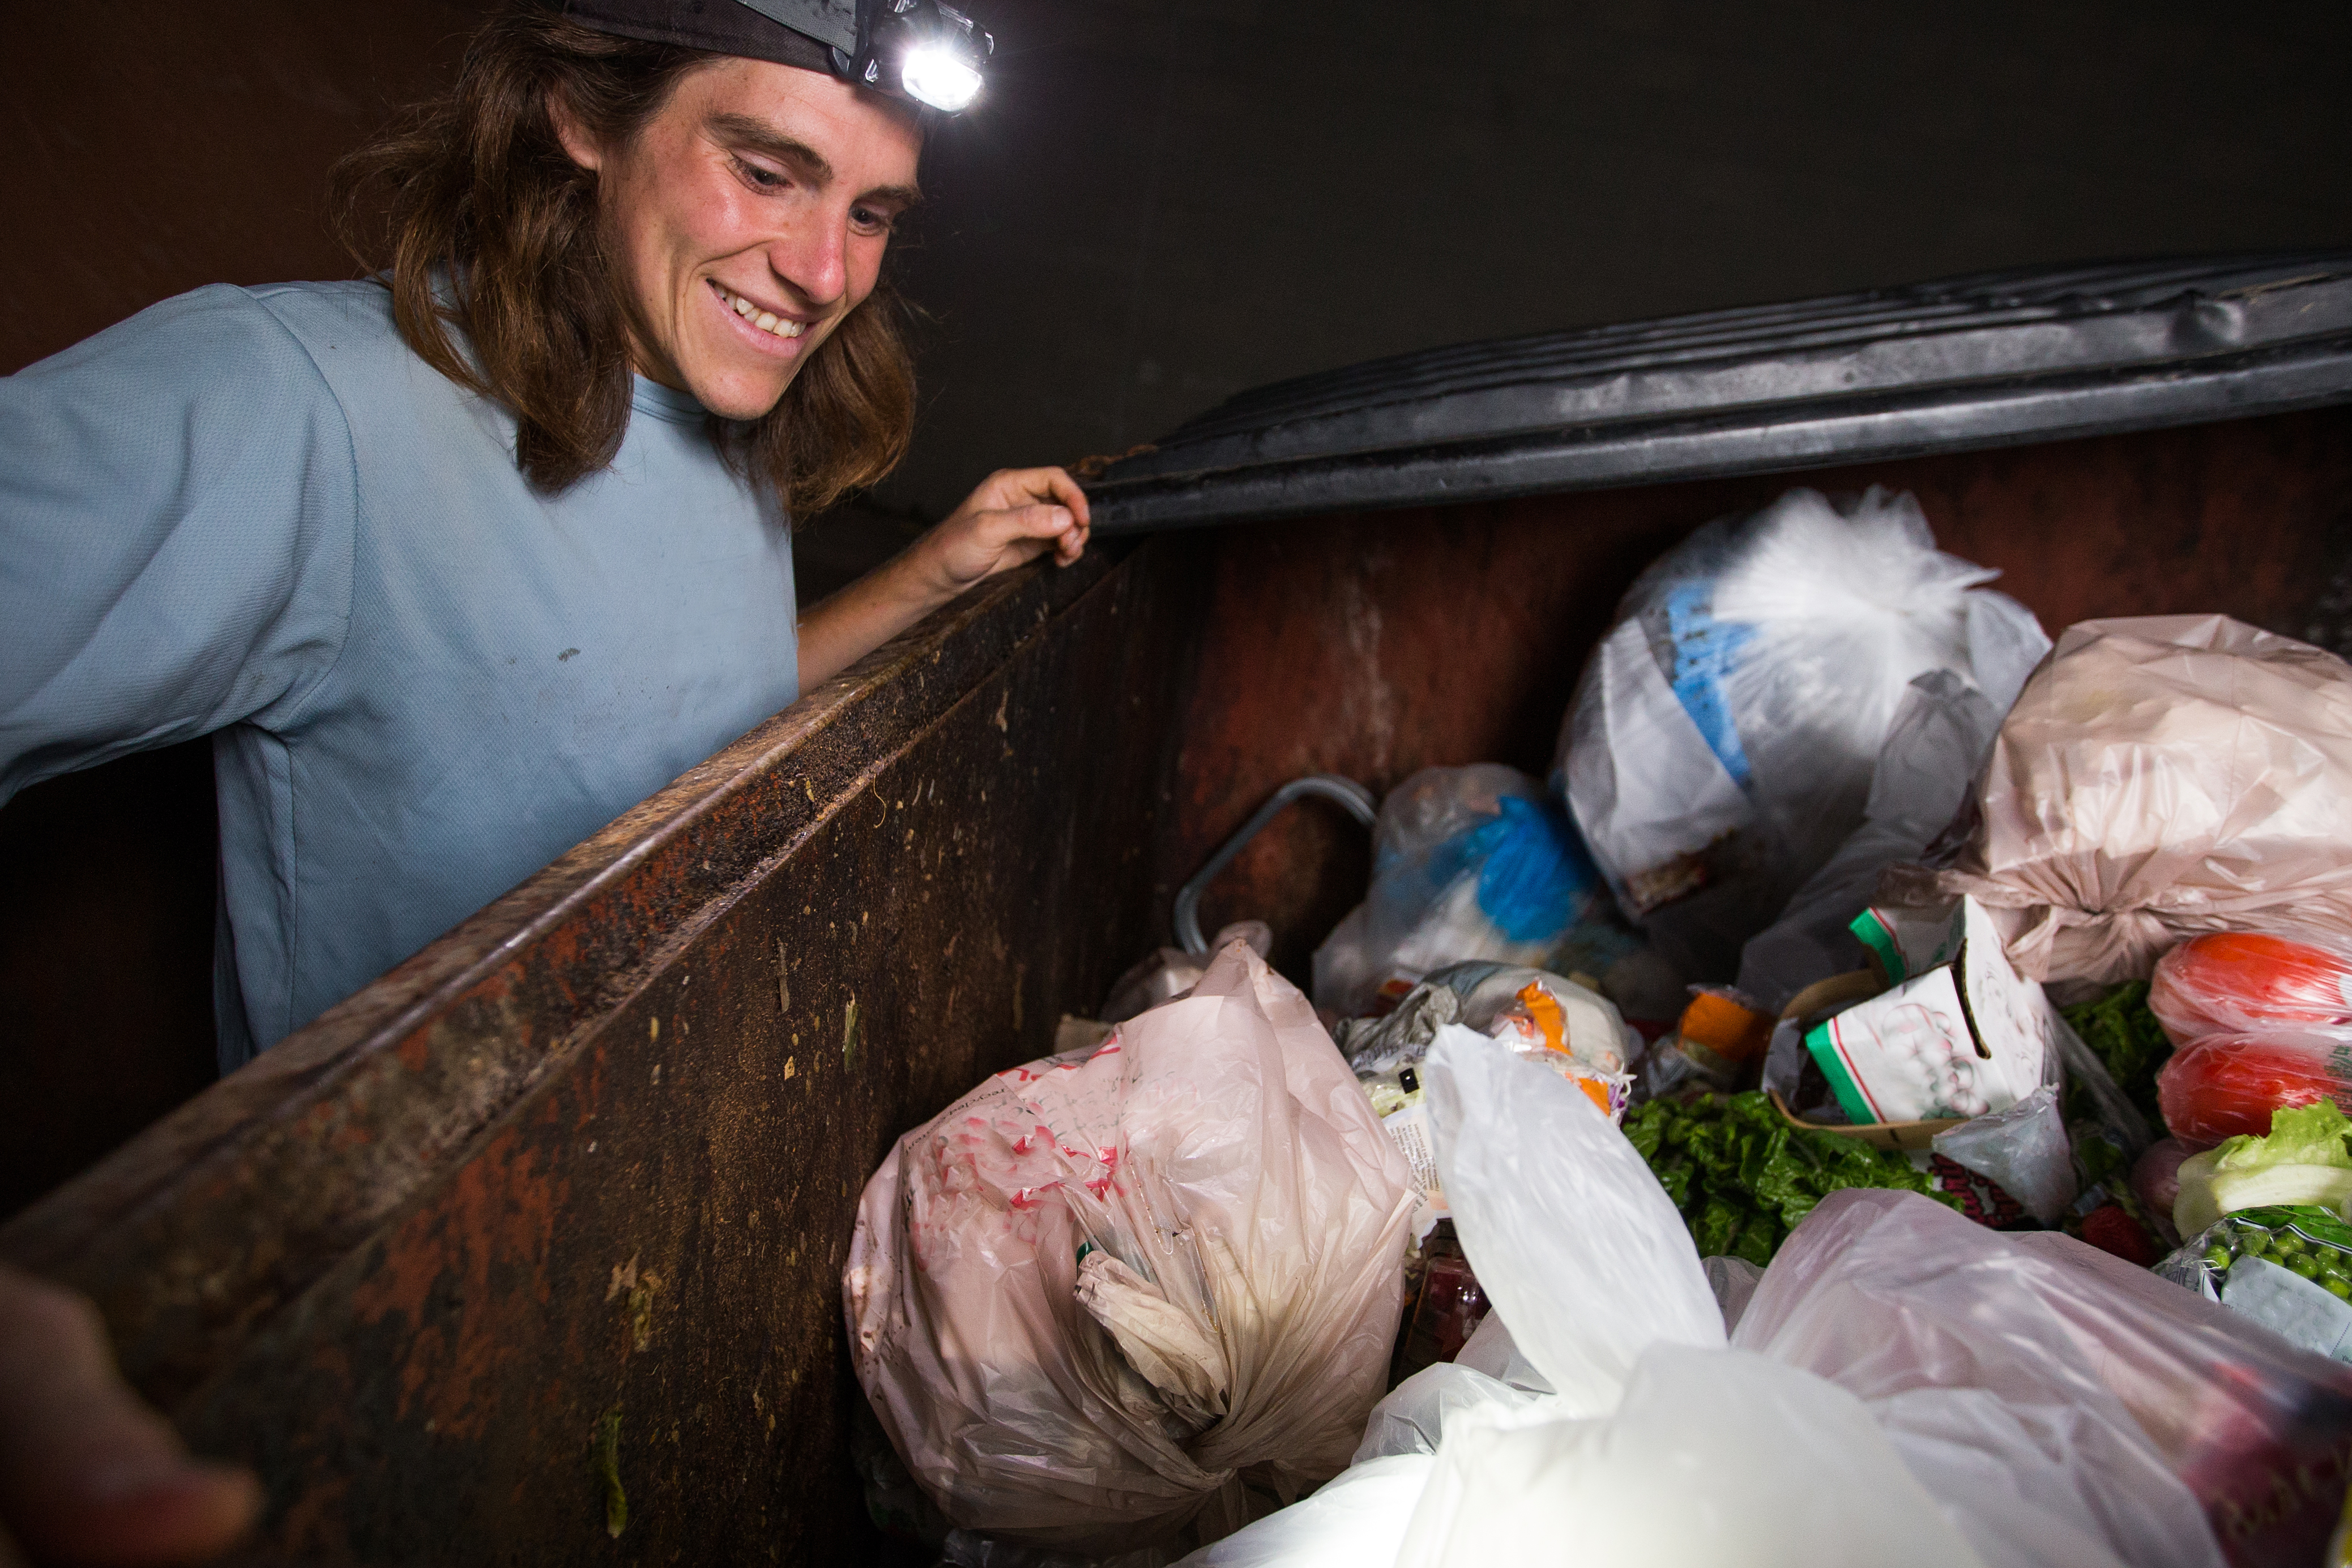 dumpster diving at night - smiling man looking into a dumpster